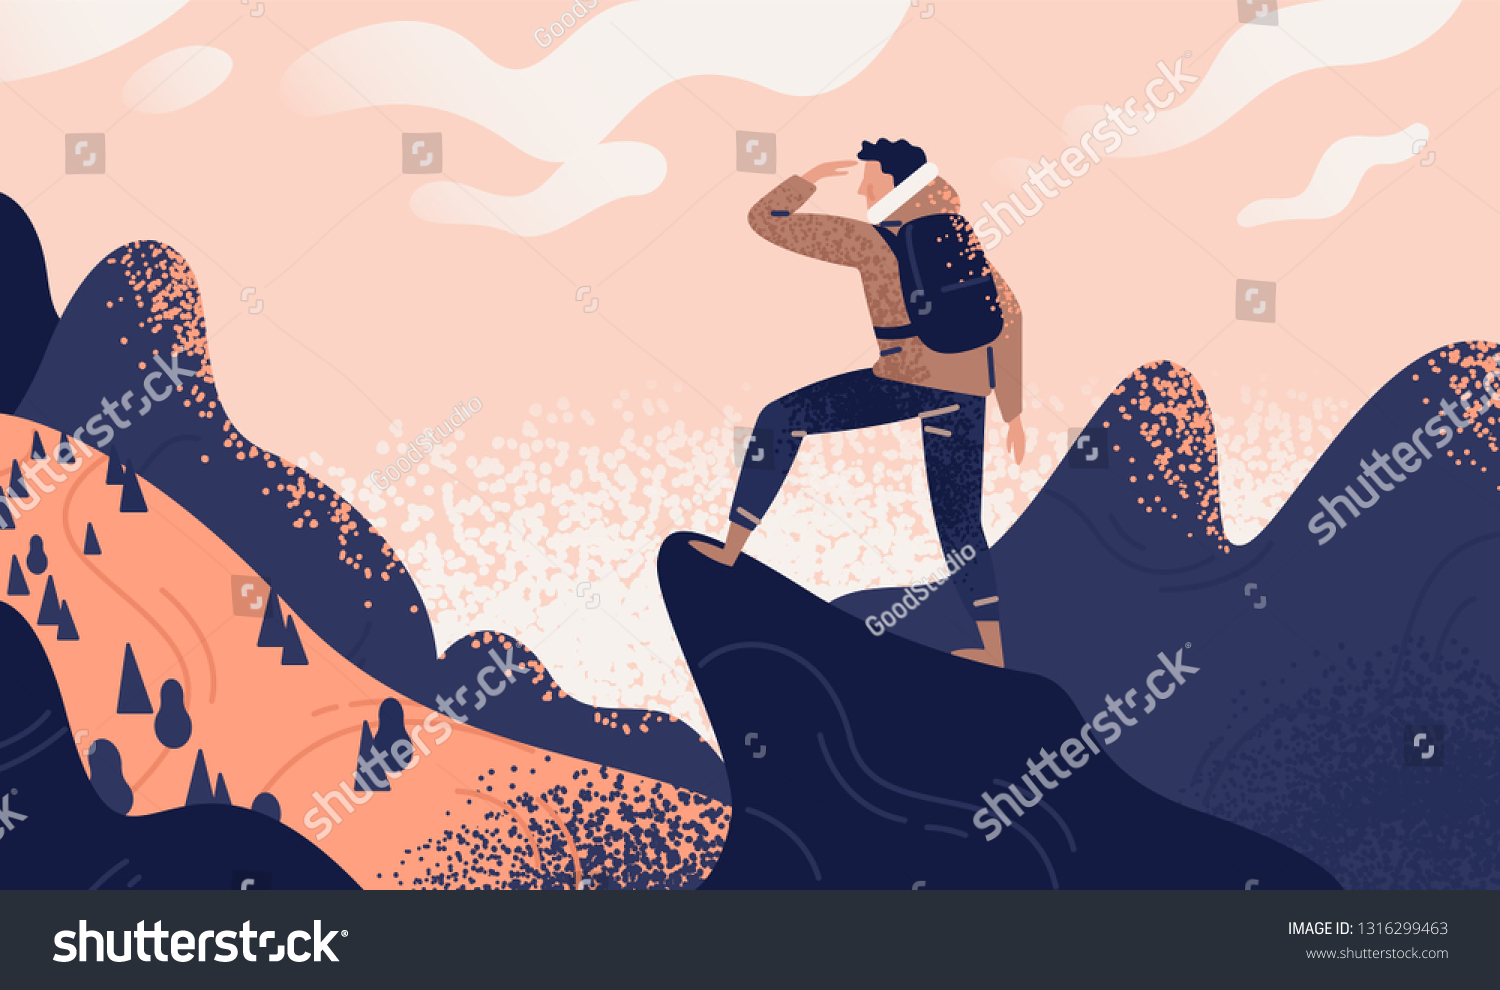 Man with backpack, traveller or explorer standing on top of mountain or cliff and looking on valley. Concept of discovery, exploration, hiking, adventure tourism and travel. Flat vector illustration. #1316299463